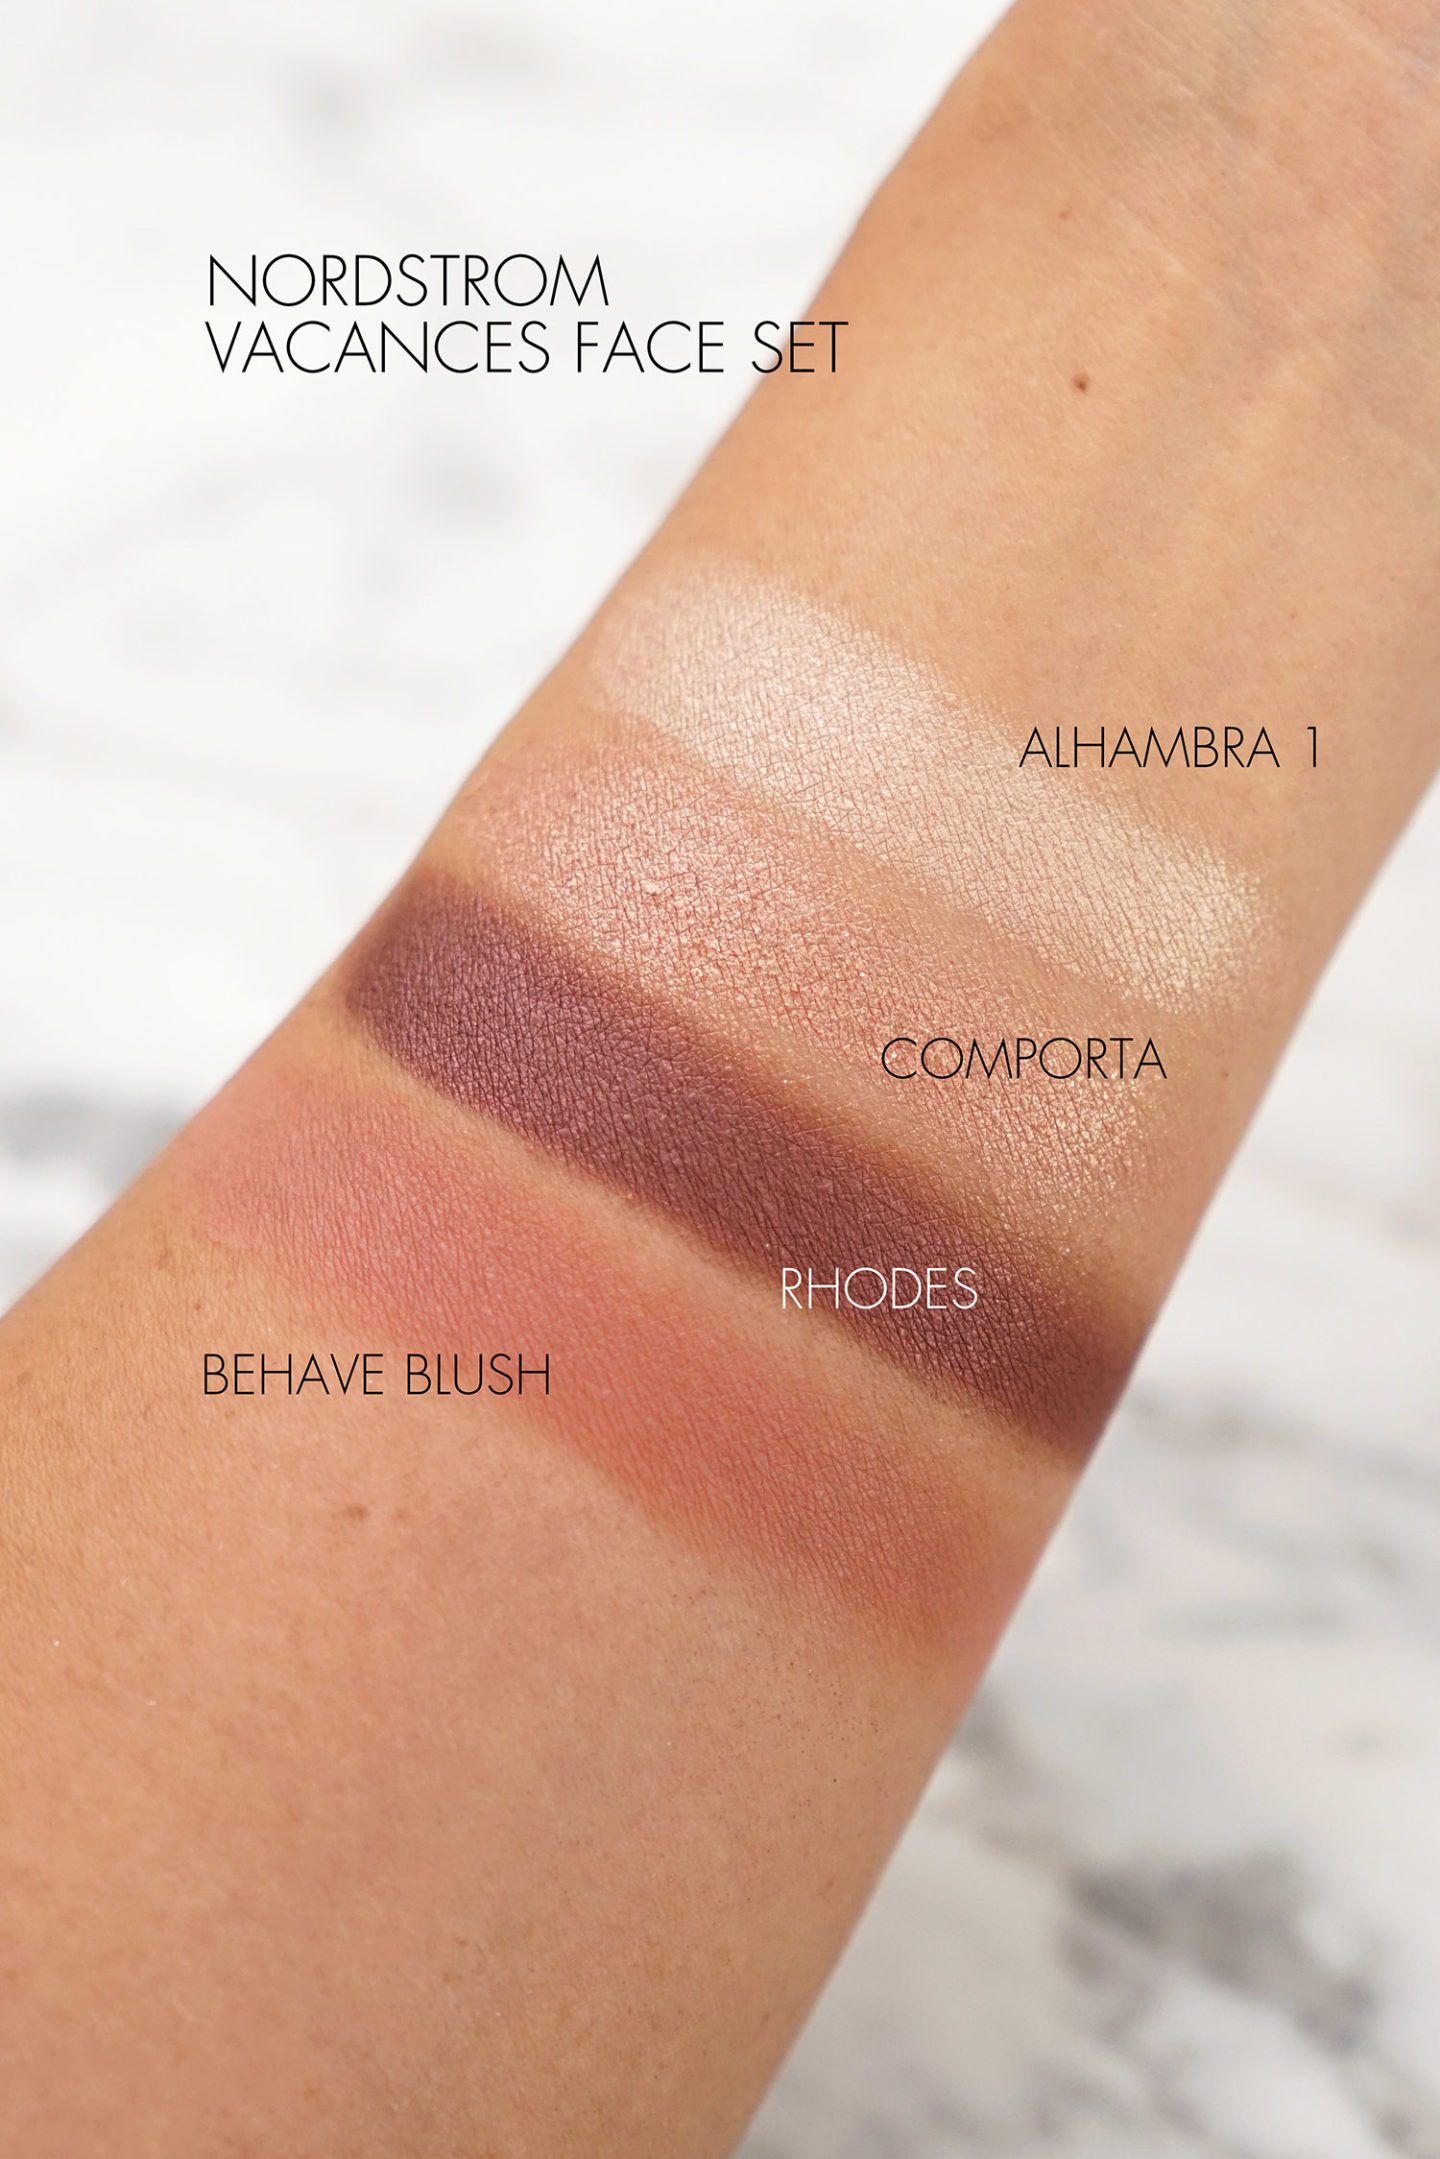 Nordstrom NARS Vacances Face Set swatches